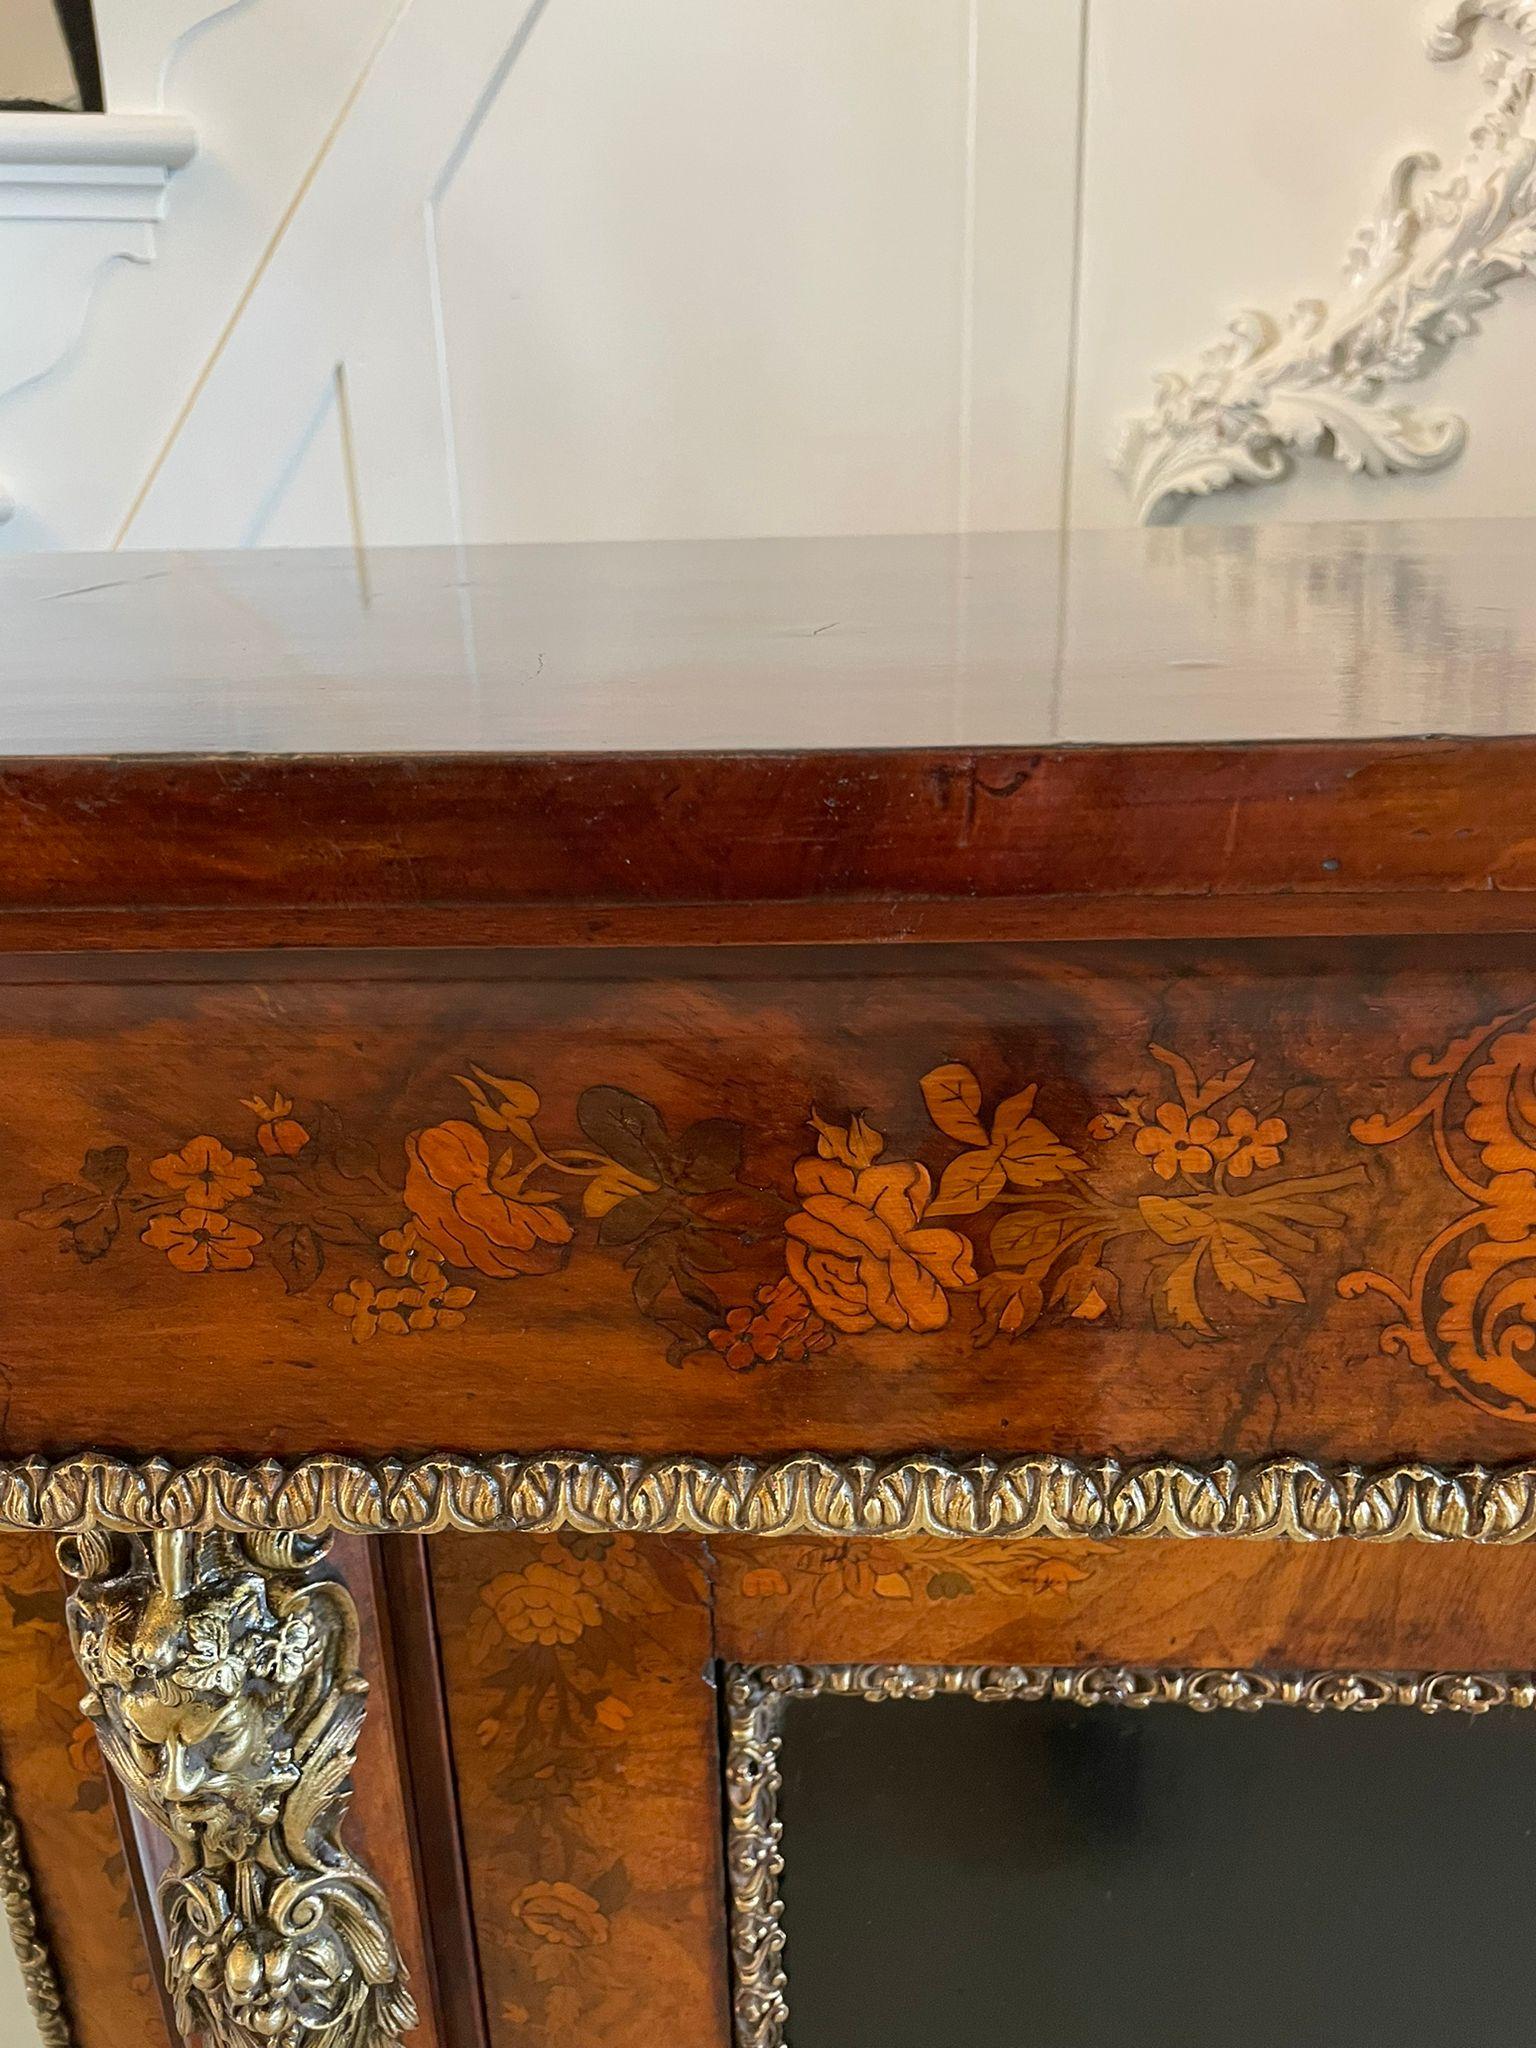 Outstanding Large Antique Inlaid Floral Marquetry Burr Walnut Credenza/Sideboard In Excellent Condition For Sale In Suffolk, GB